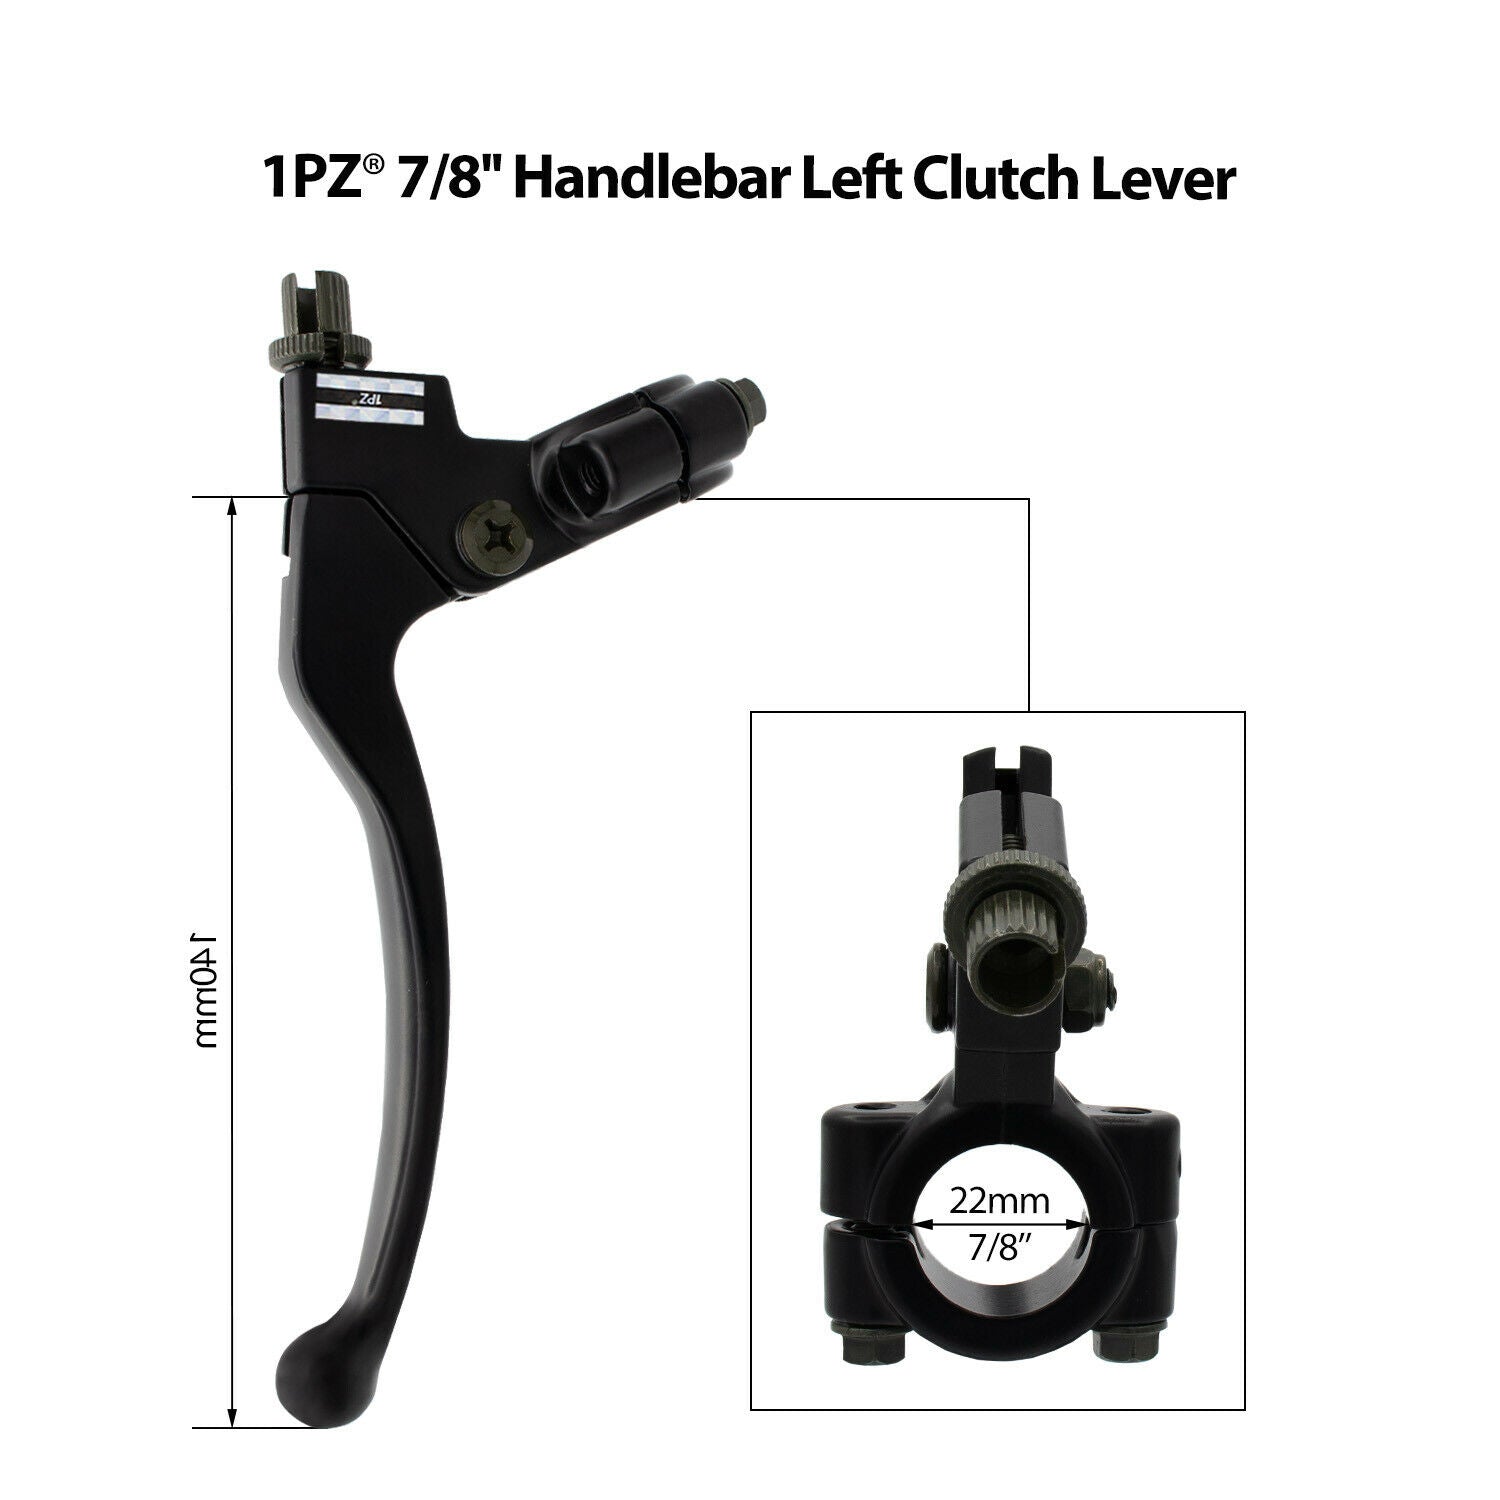 1PZ 7/8'' Handlebar Left Clutch Lever and Clutch Cable with Adjuster Replacement for Honda Yamaha Kawasaki 50cc 70cc 90cc 110cc 125cc Dirt Bikes Pit Bike